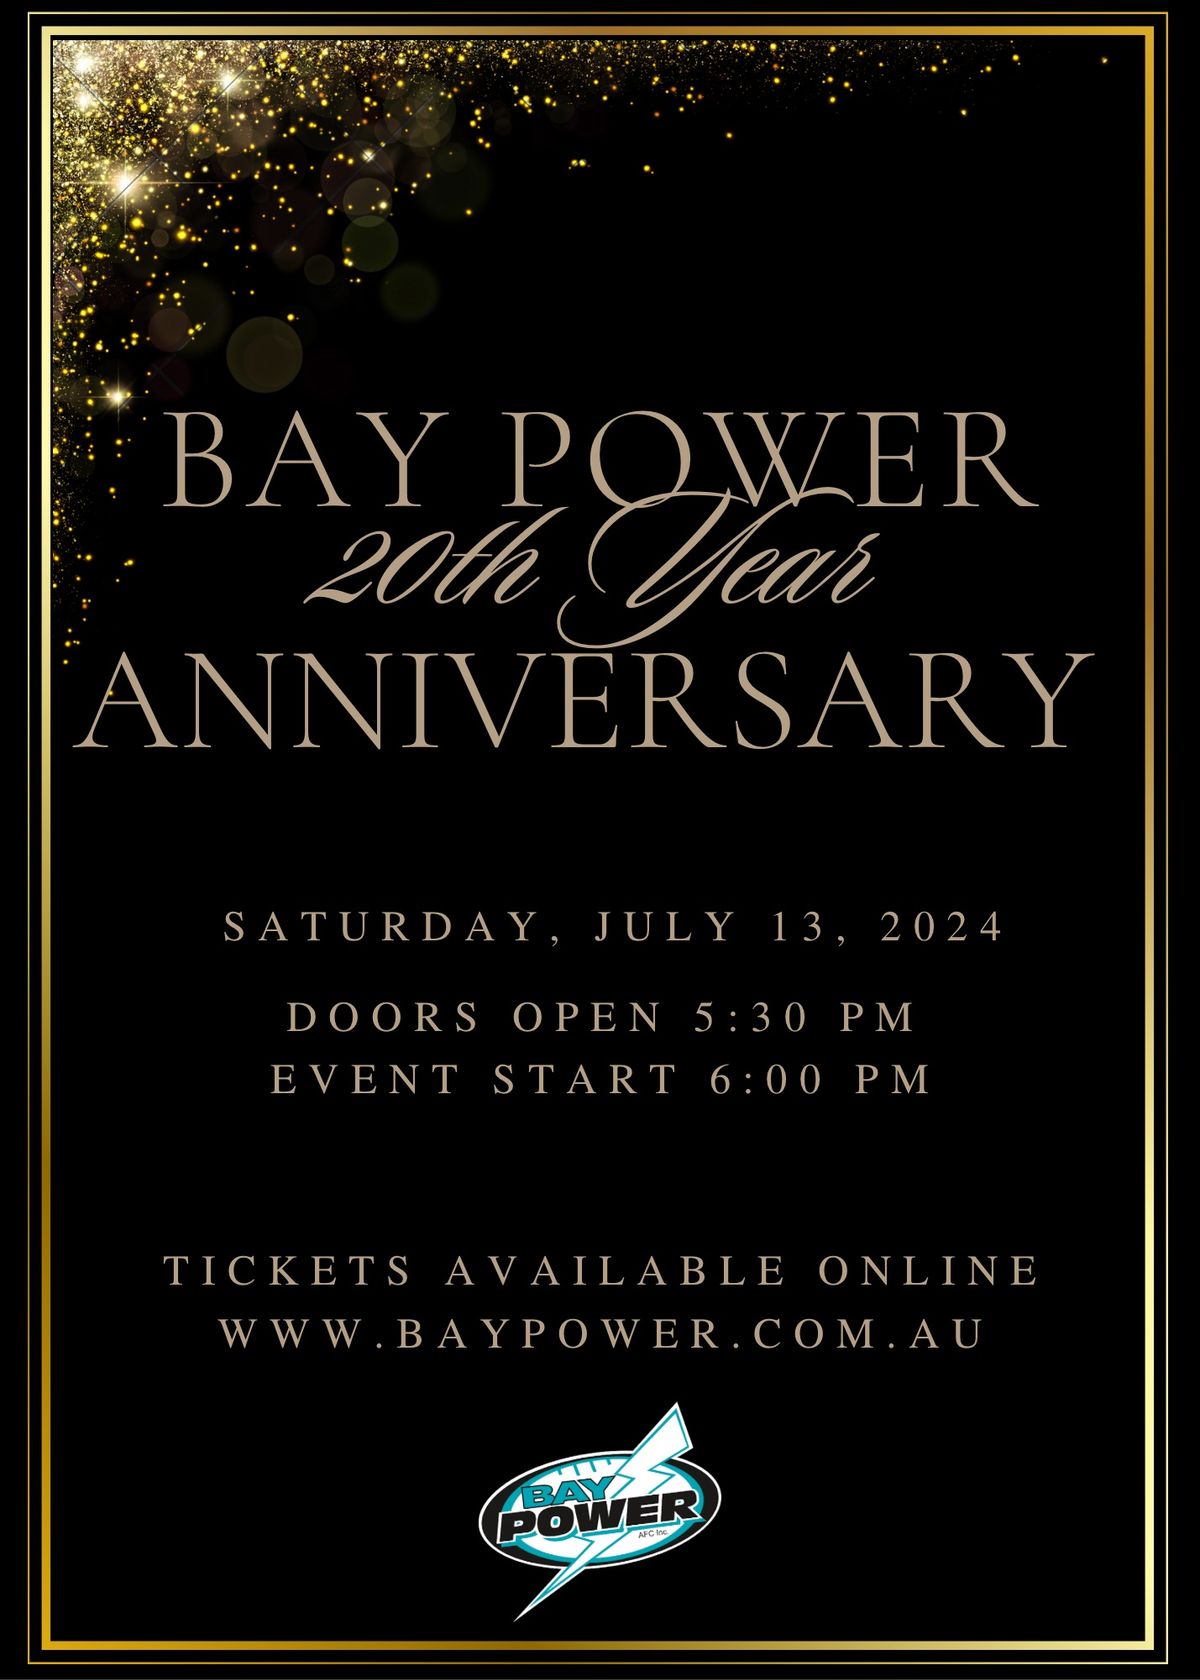 Bay Power's 20th Anniversary Event